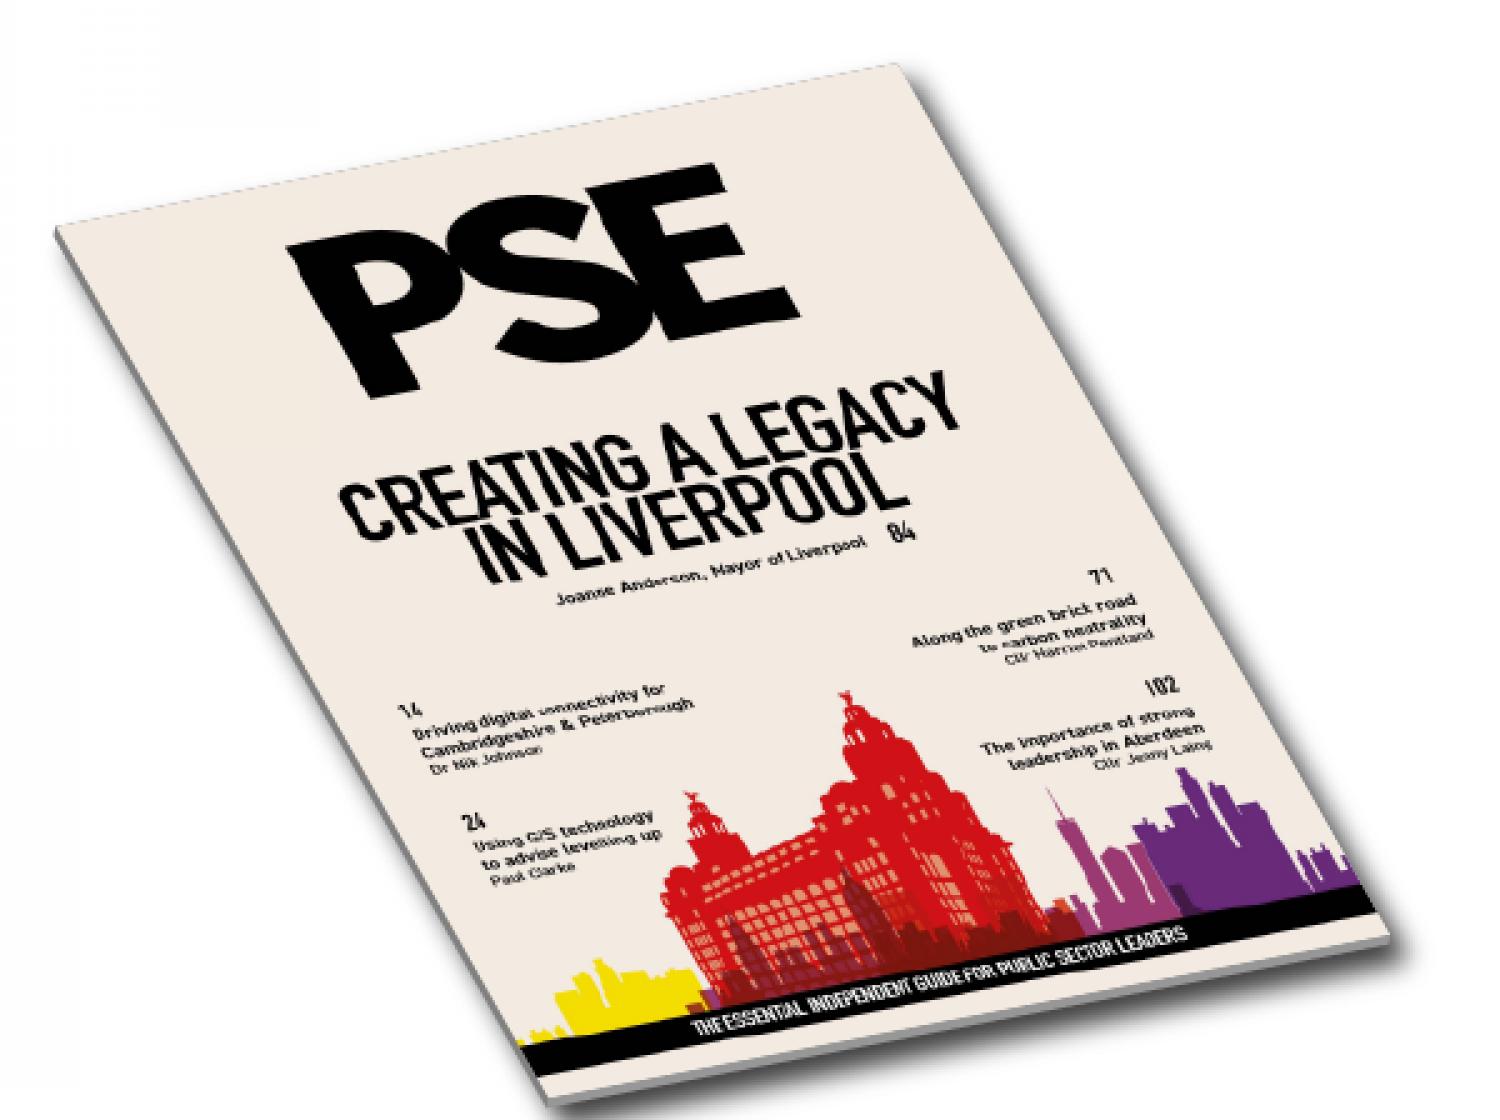 Creating a Legacy in Liverpool